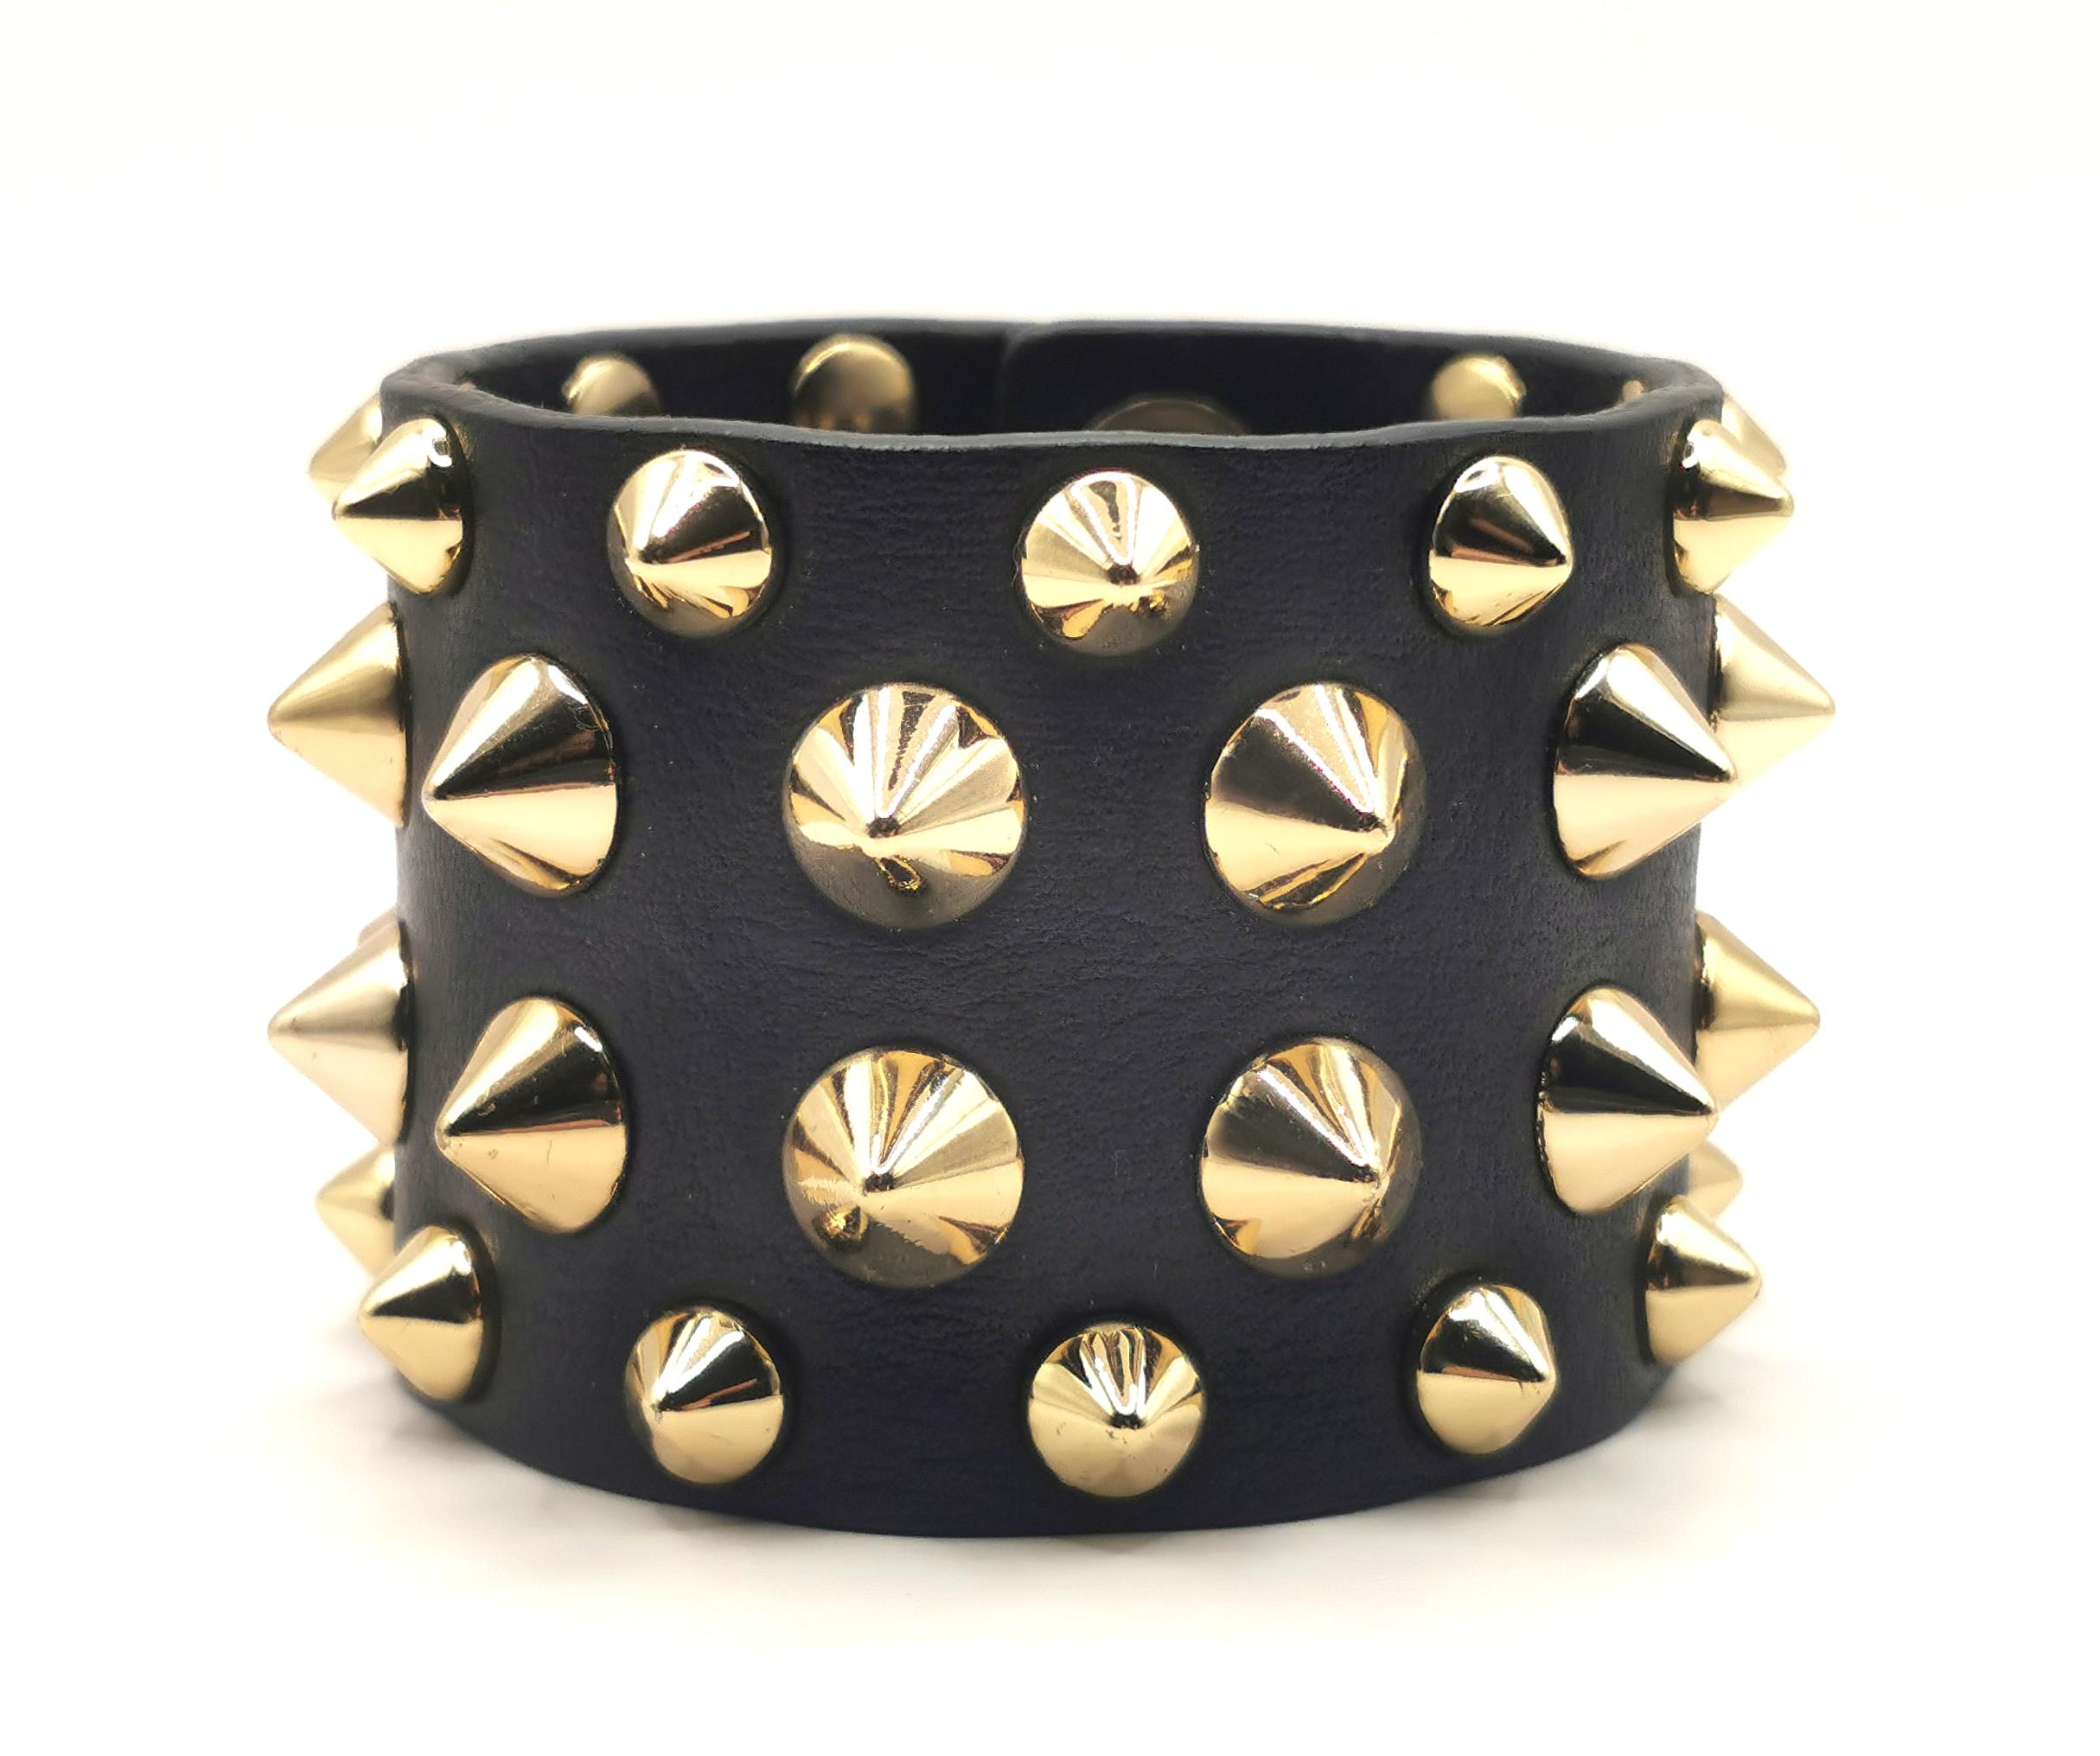 Channel your inner rock goddess with this fabulous Balmain black leather studded cuff bracelet.

Spiked gold studs adorn this wide and chunky soft black leather cuff bracelet.

It is easy to wear and full of attitude, the perfect piece for adding a